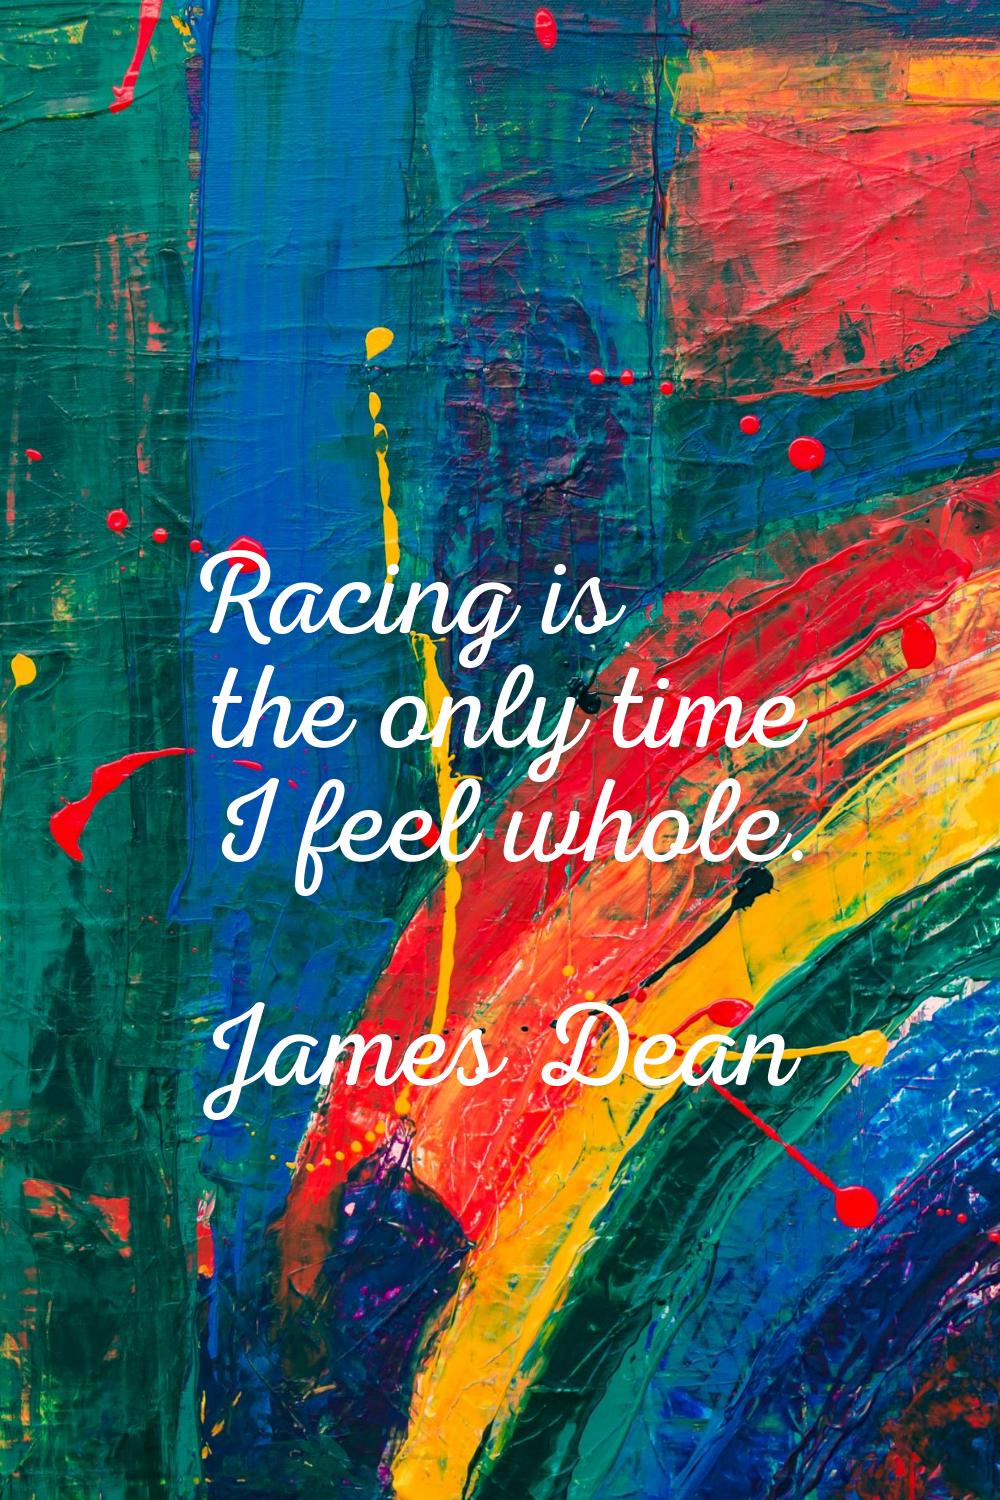 Racing is the only time I feel whole.